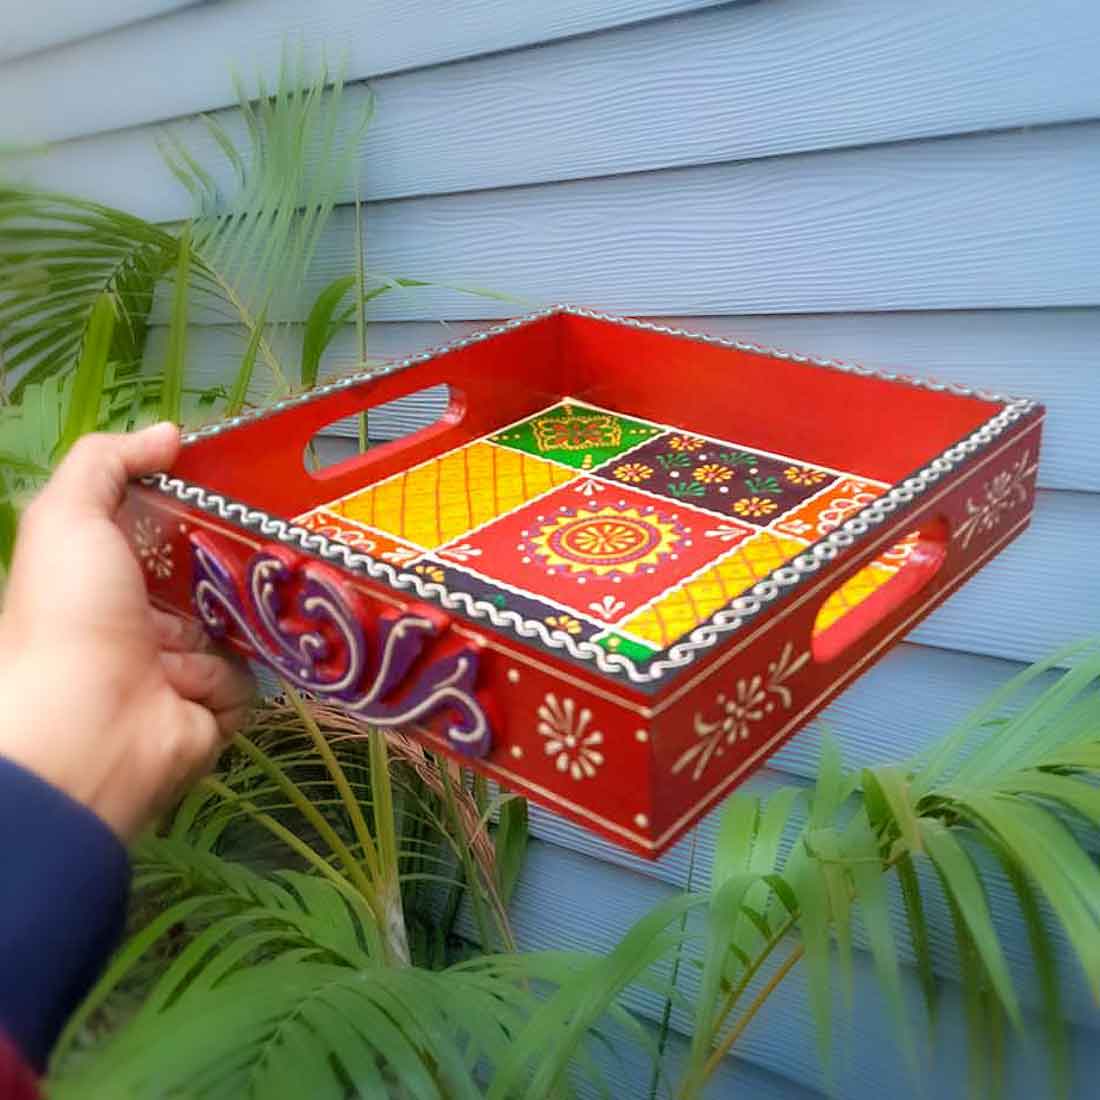 Wooden Tray for Decoration - 8 Inch - ApkaMart